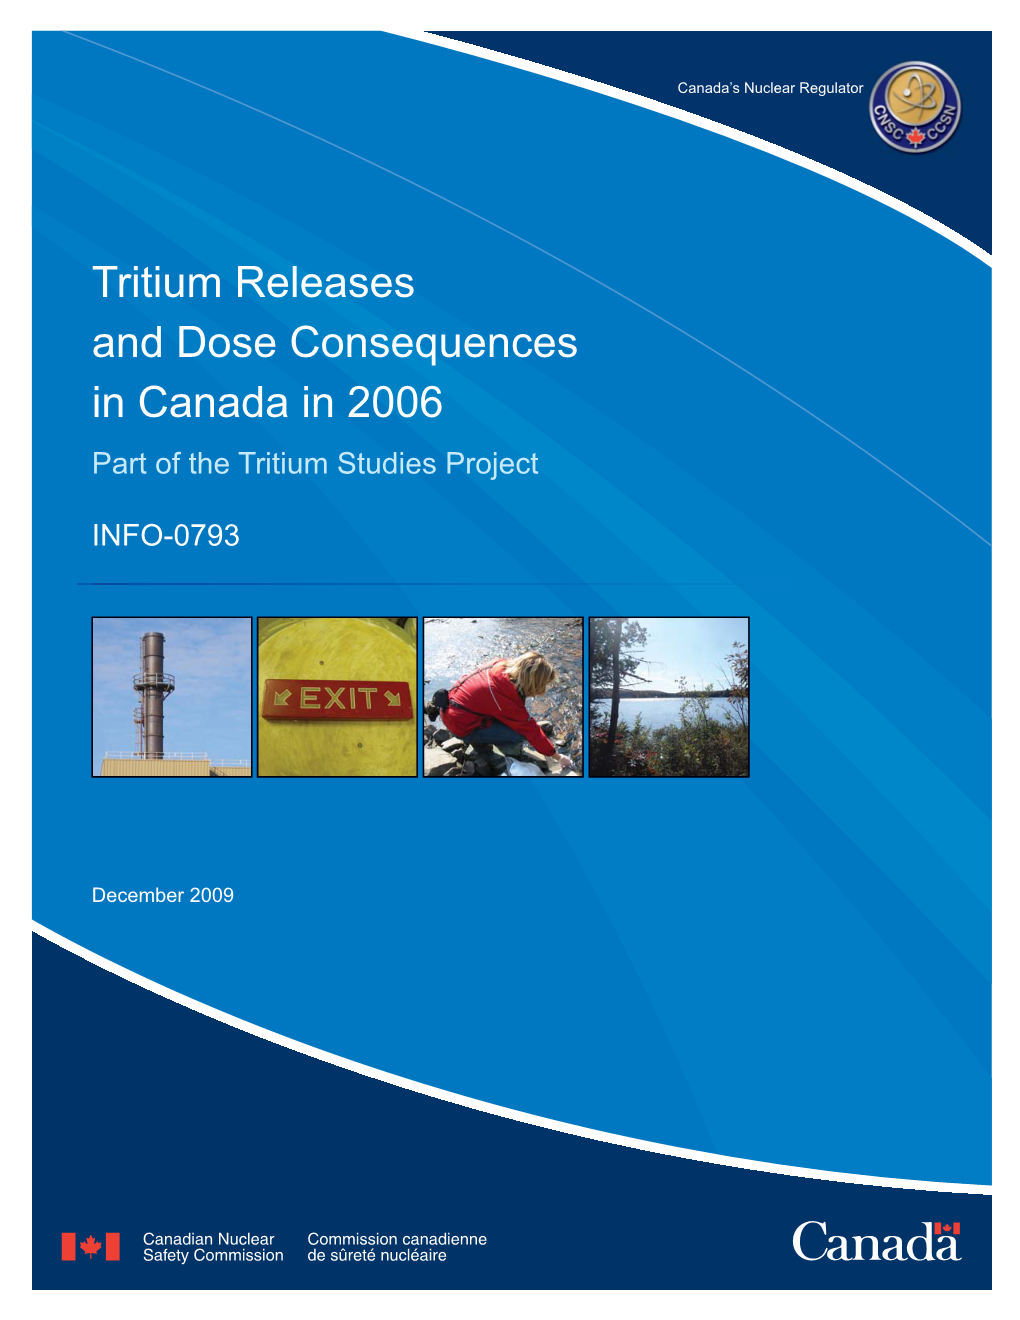 Tritium Releases and Dose Consequences in Canada in 2006 Part of the Tritium Studies Project